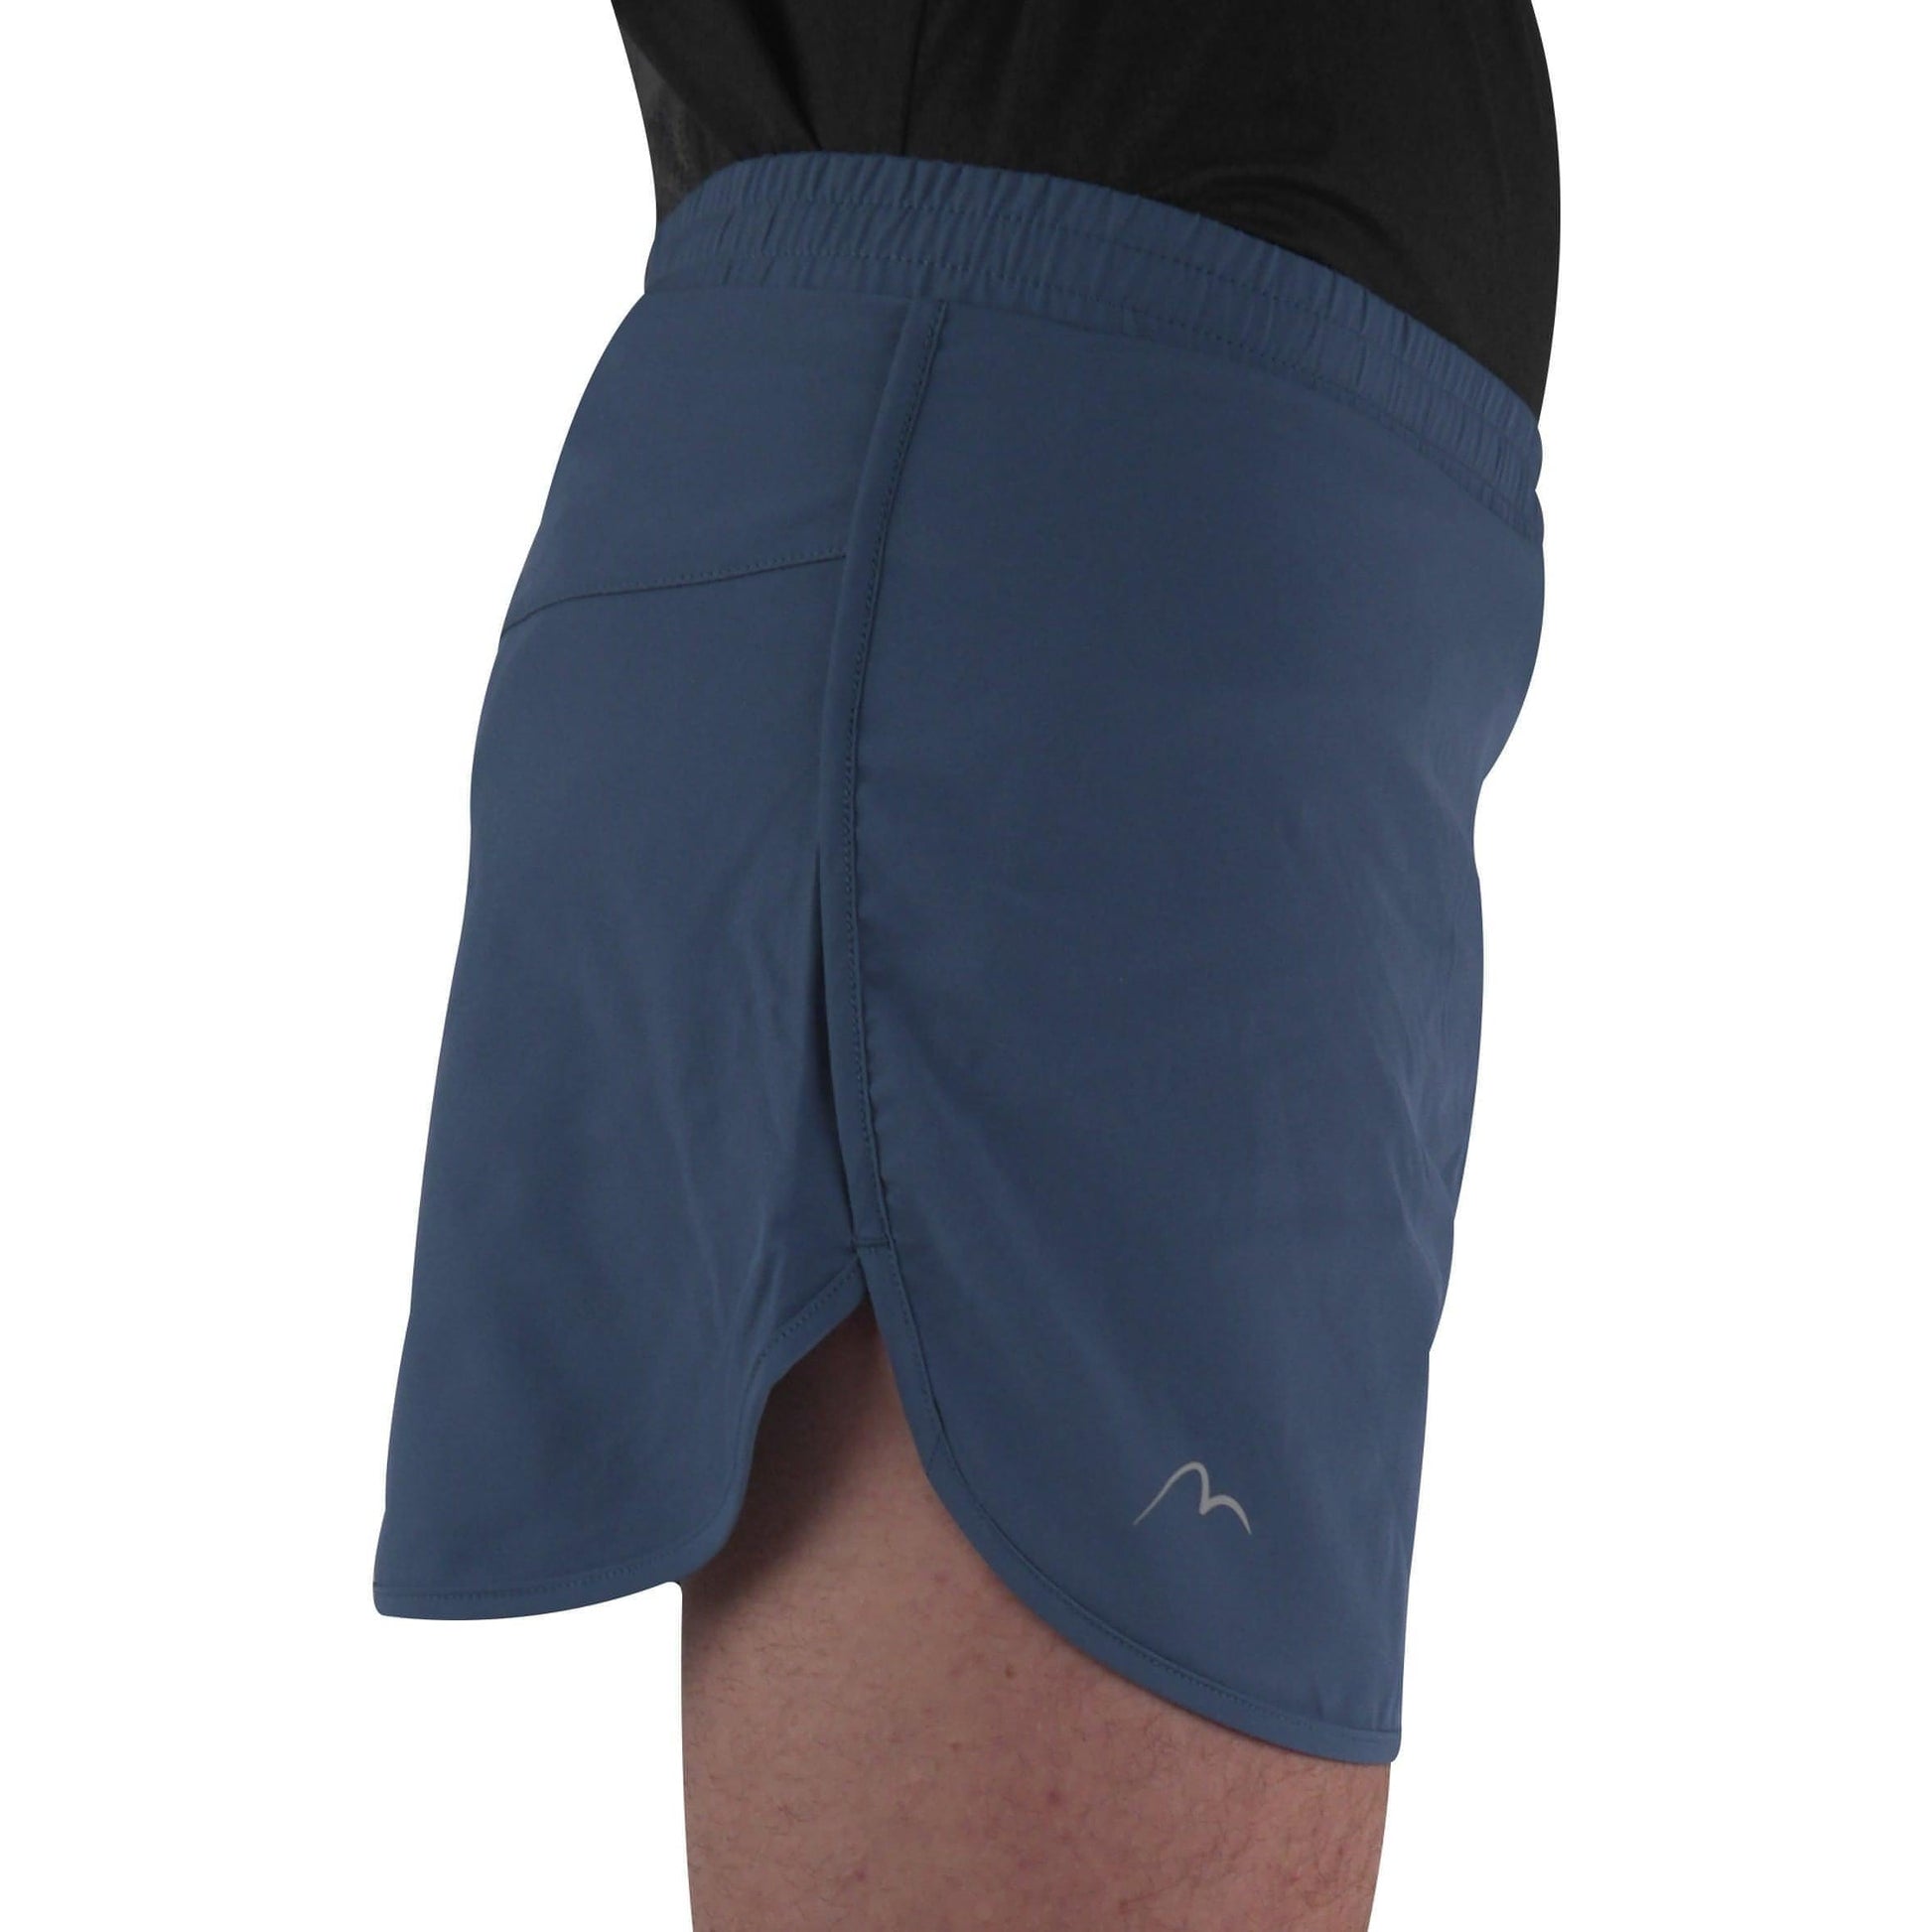 More Mile Racer Shorts Mm3068 Side - Side View